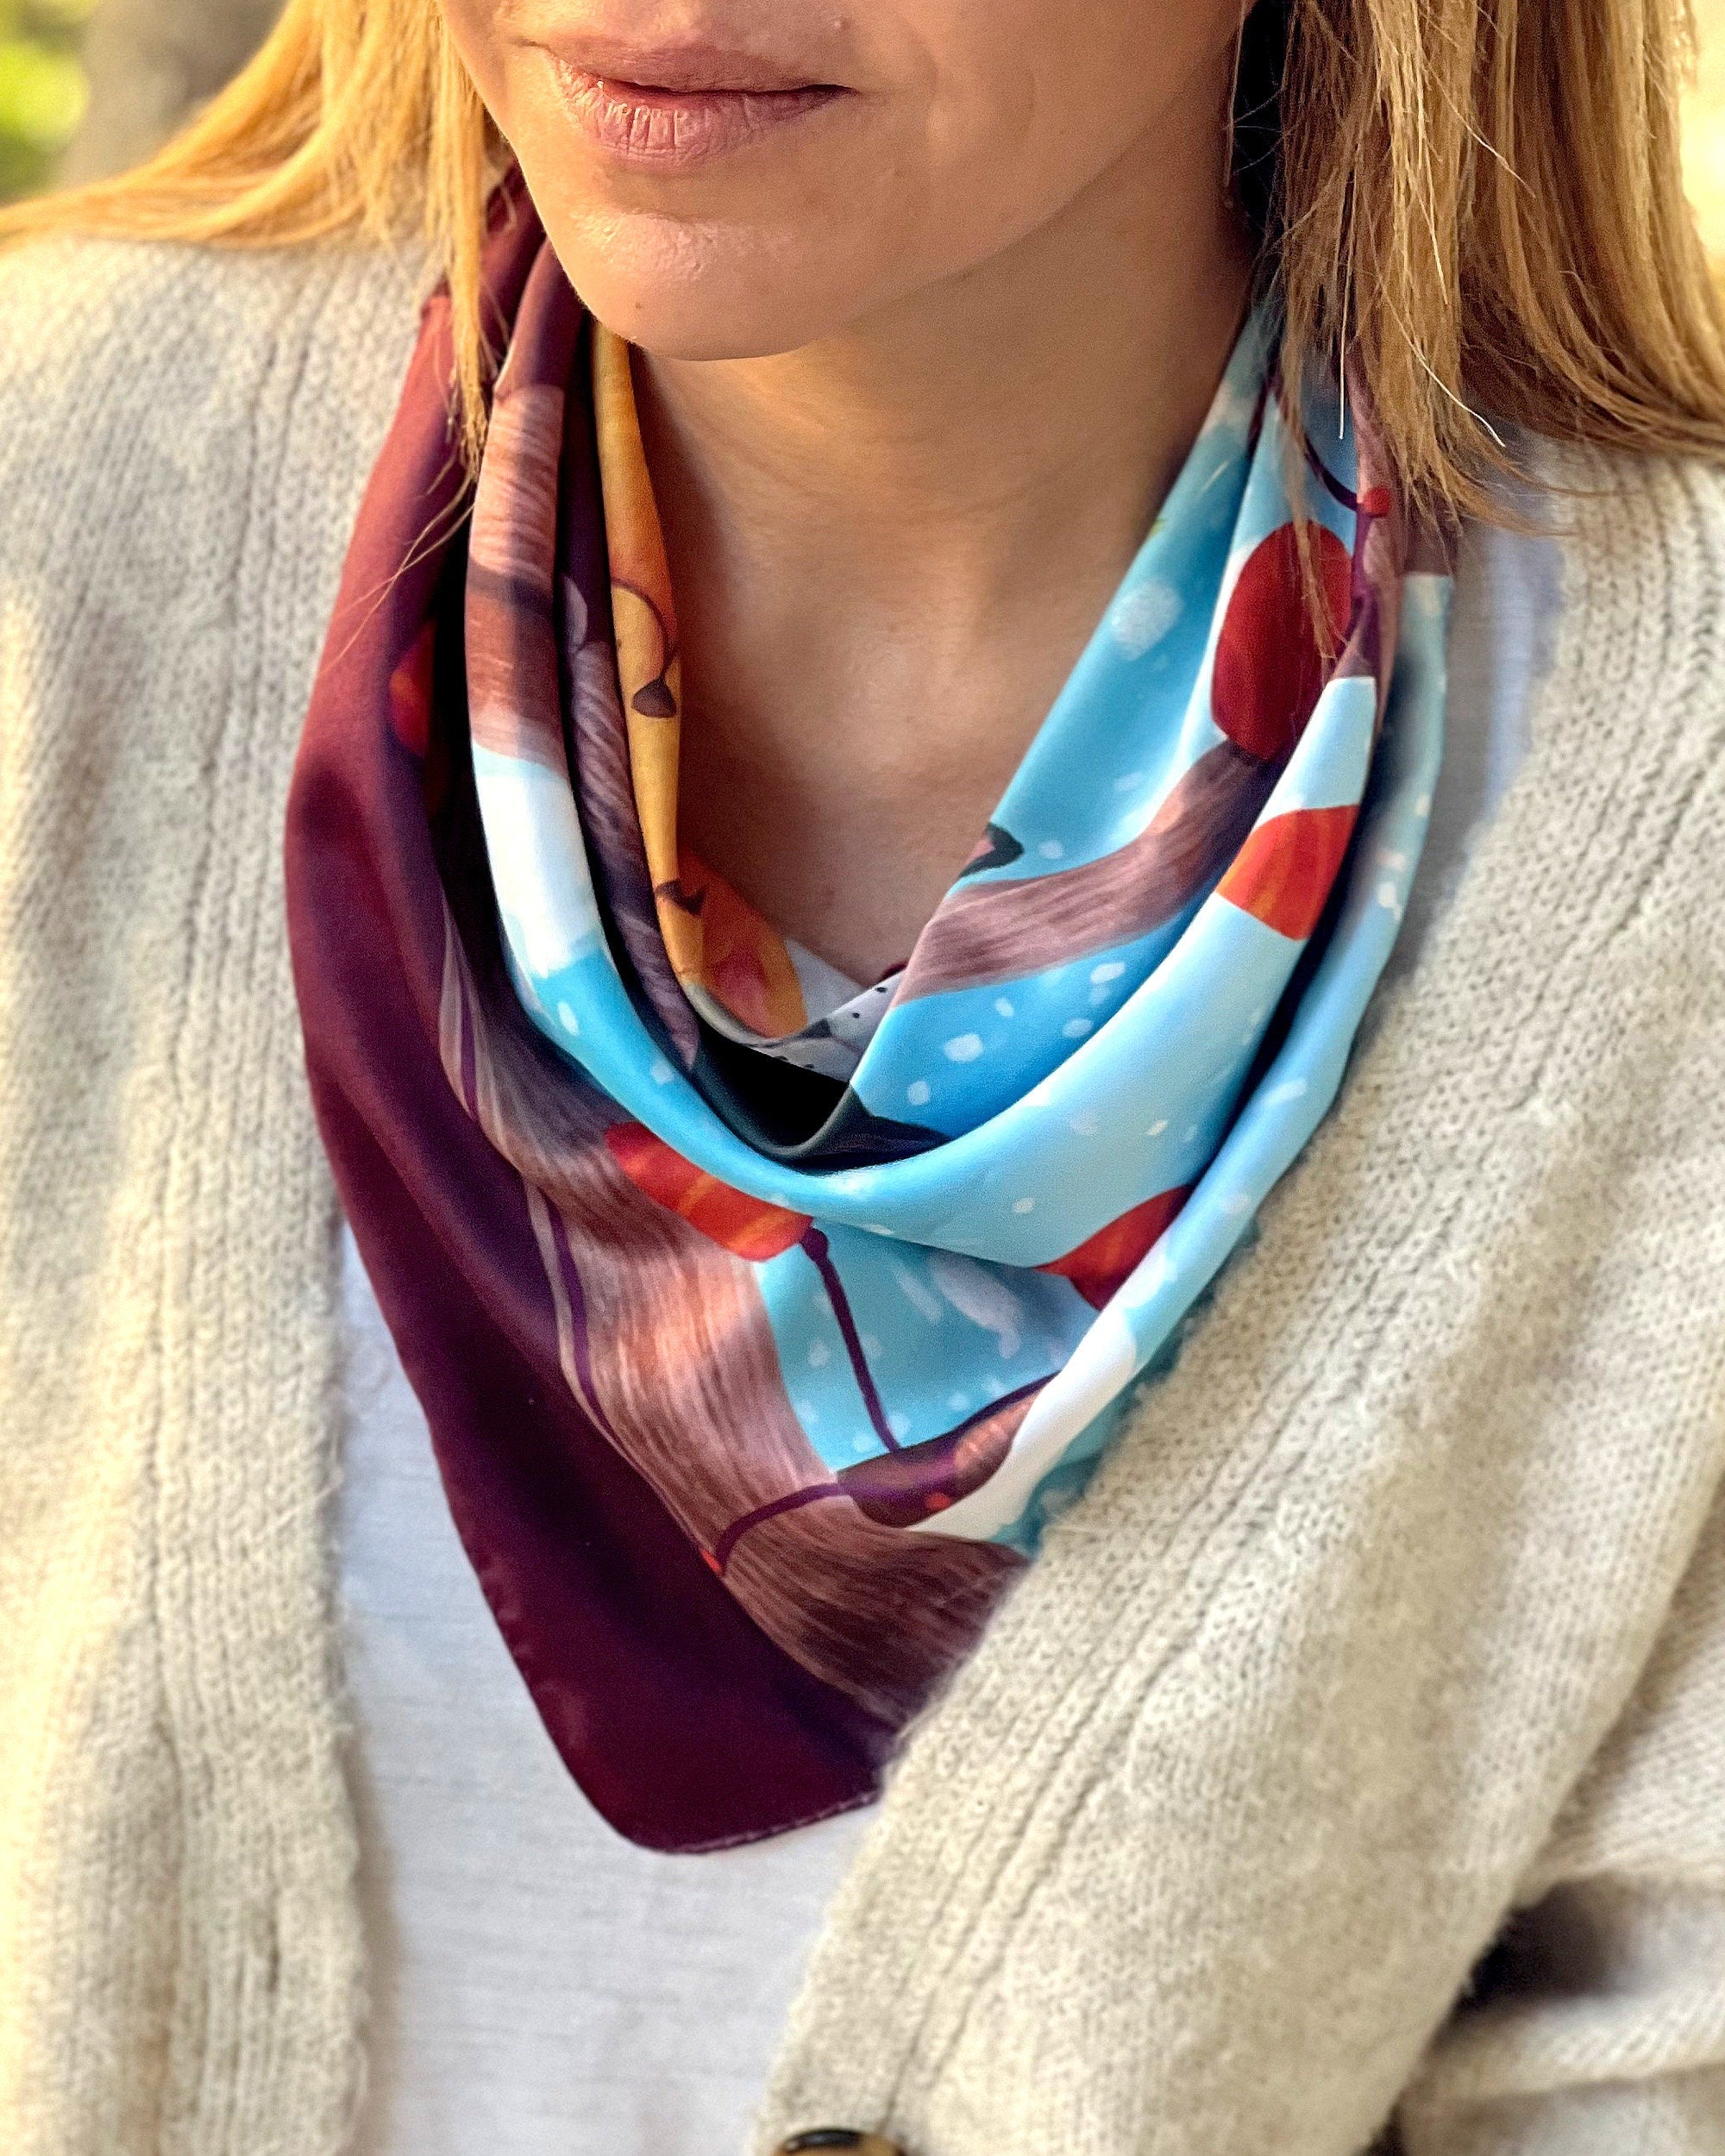 Make a style statement with Design Scarf. This trendy scarf is made from high-quality satin material and features a stylish animal print design.